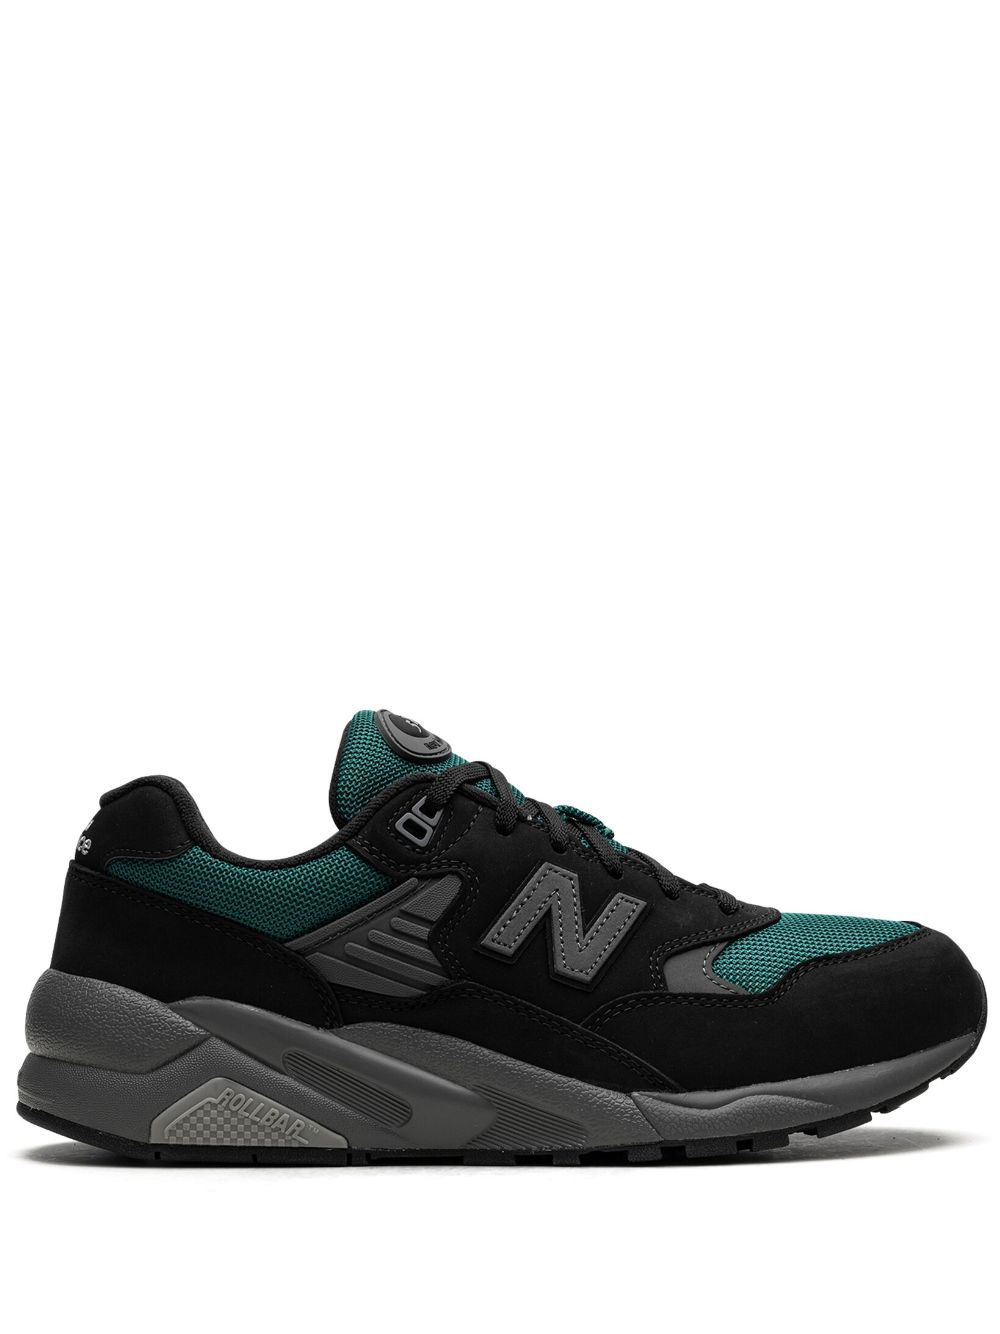 New Balance 580 suede sneakers - Black